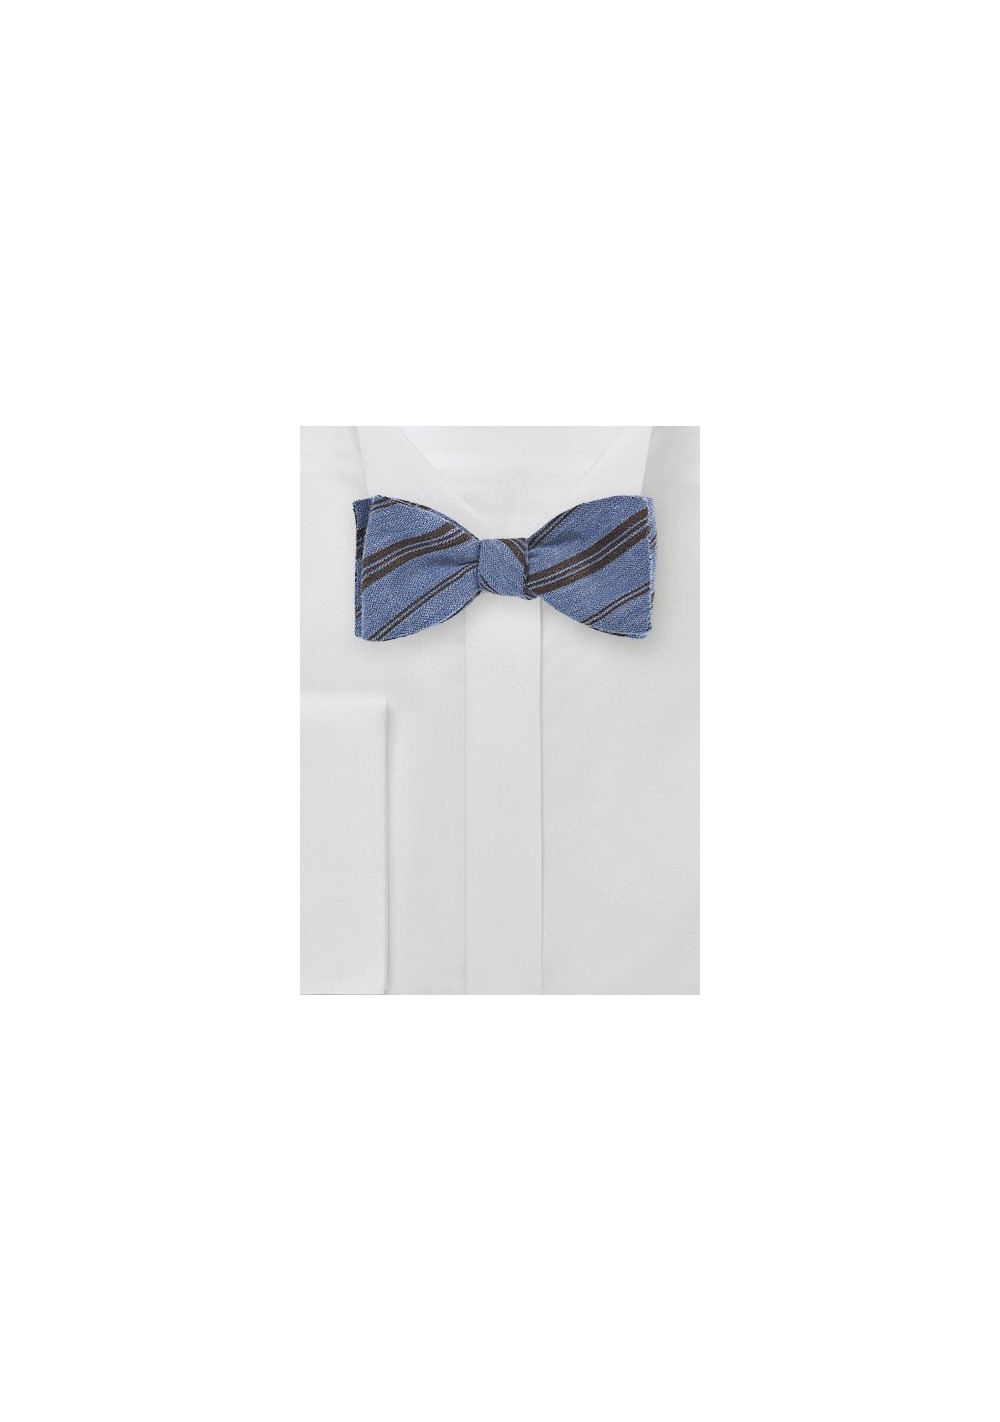 Striped Wool Bow Tie in Blue and Brown